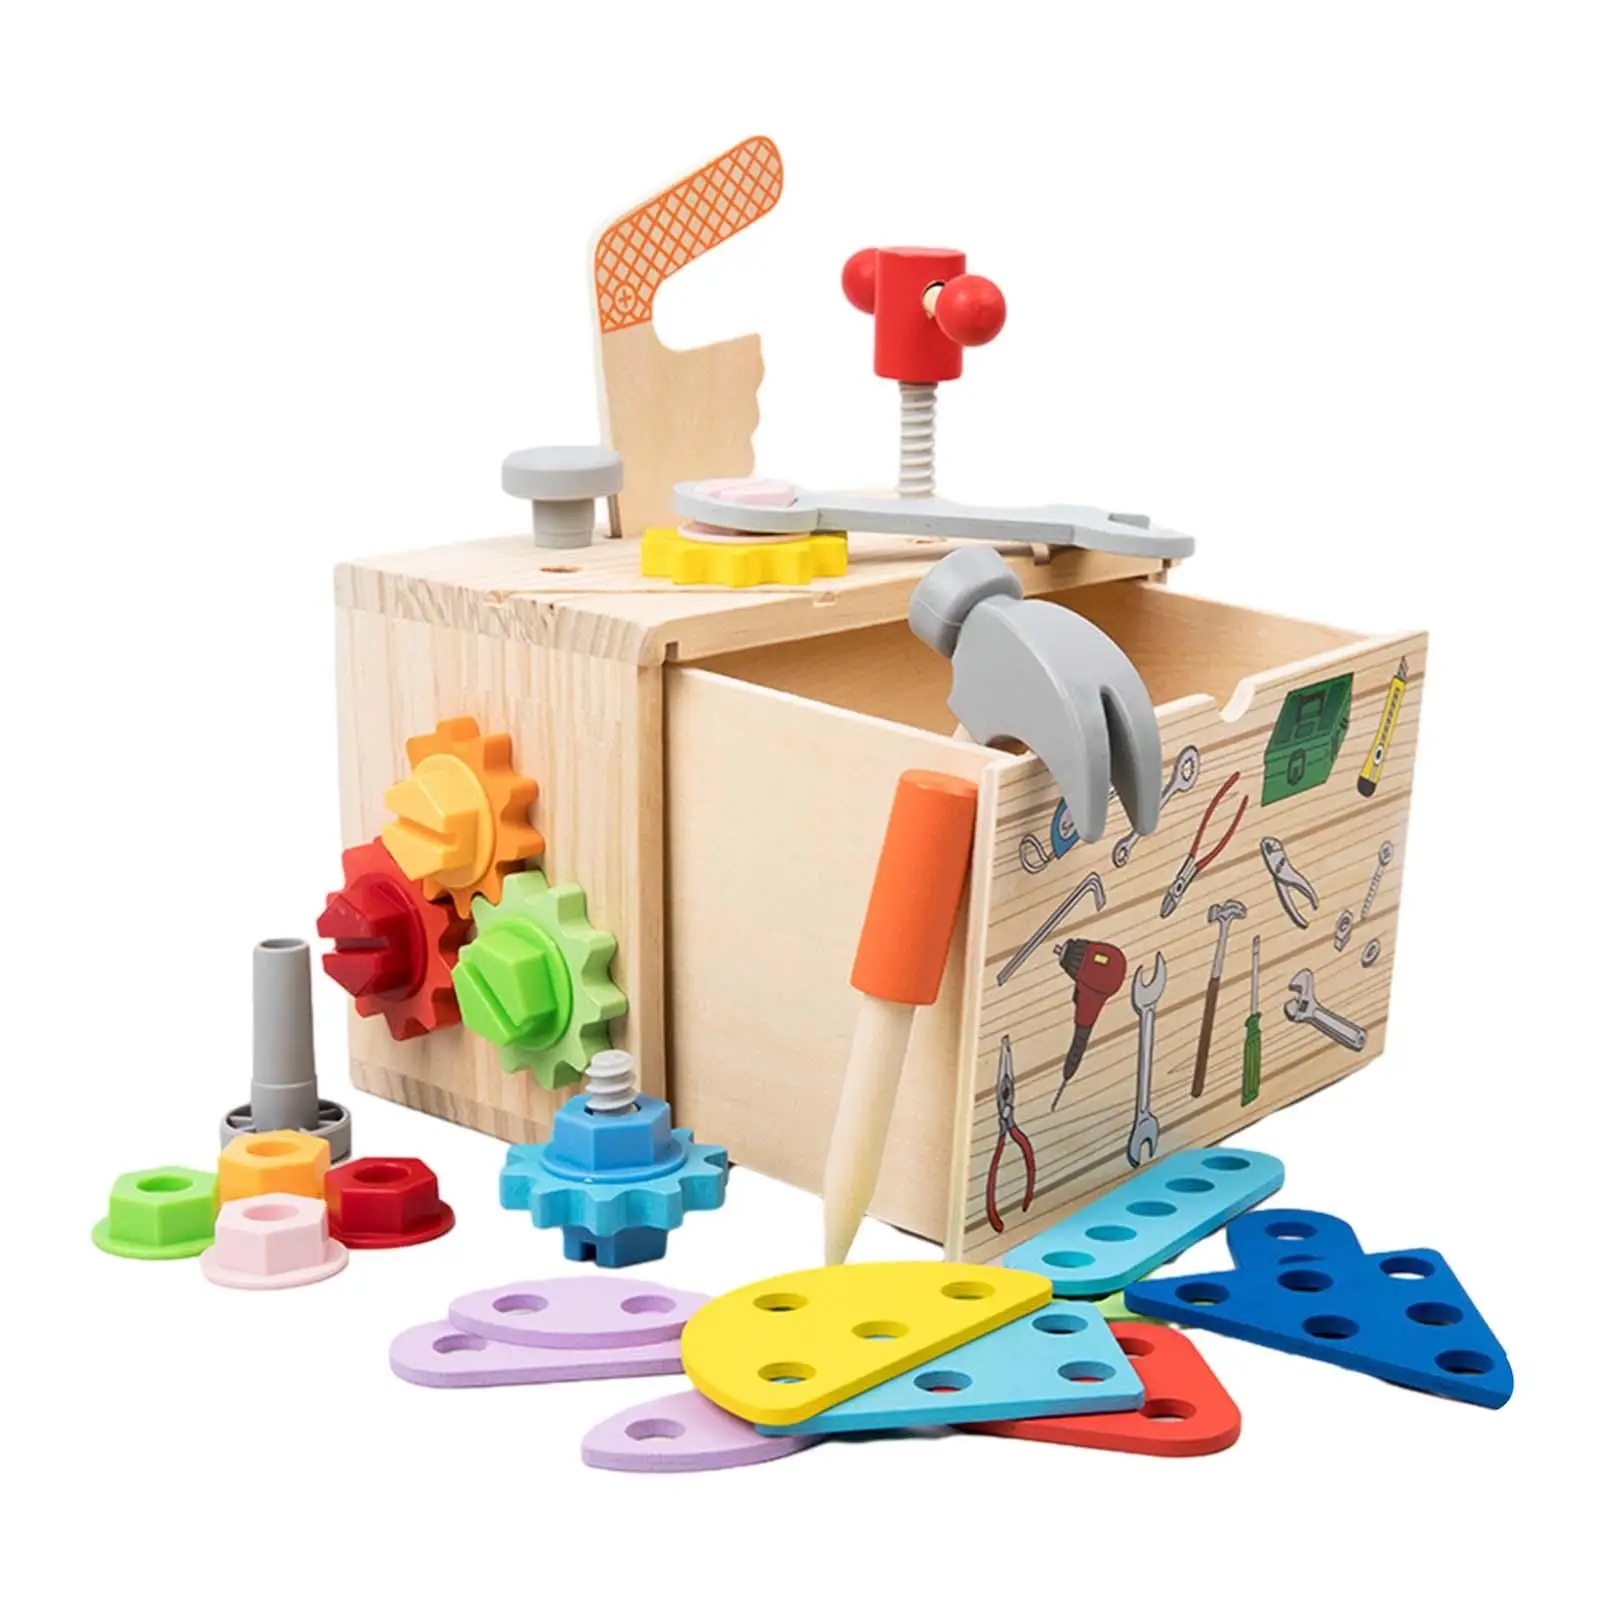 Wooden Toolbox Toy Develops Fine Motor Skills Playset Diy Kid Play Tool Set for Holiday Christmas Toddlers Ages 3+ Festivals